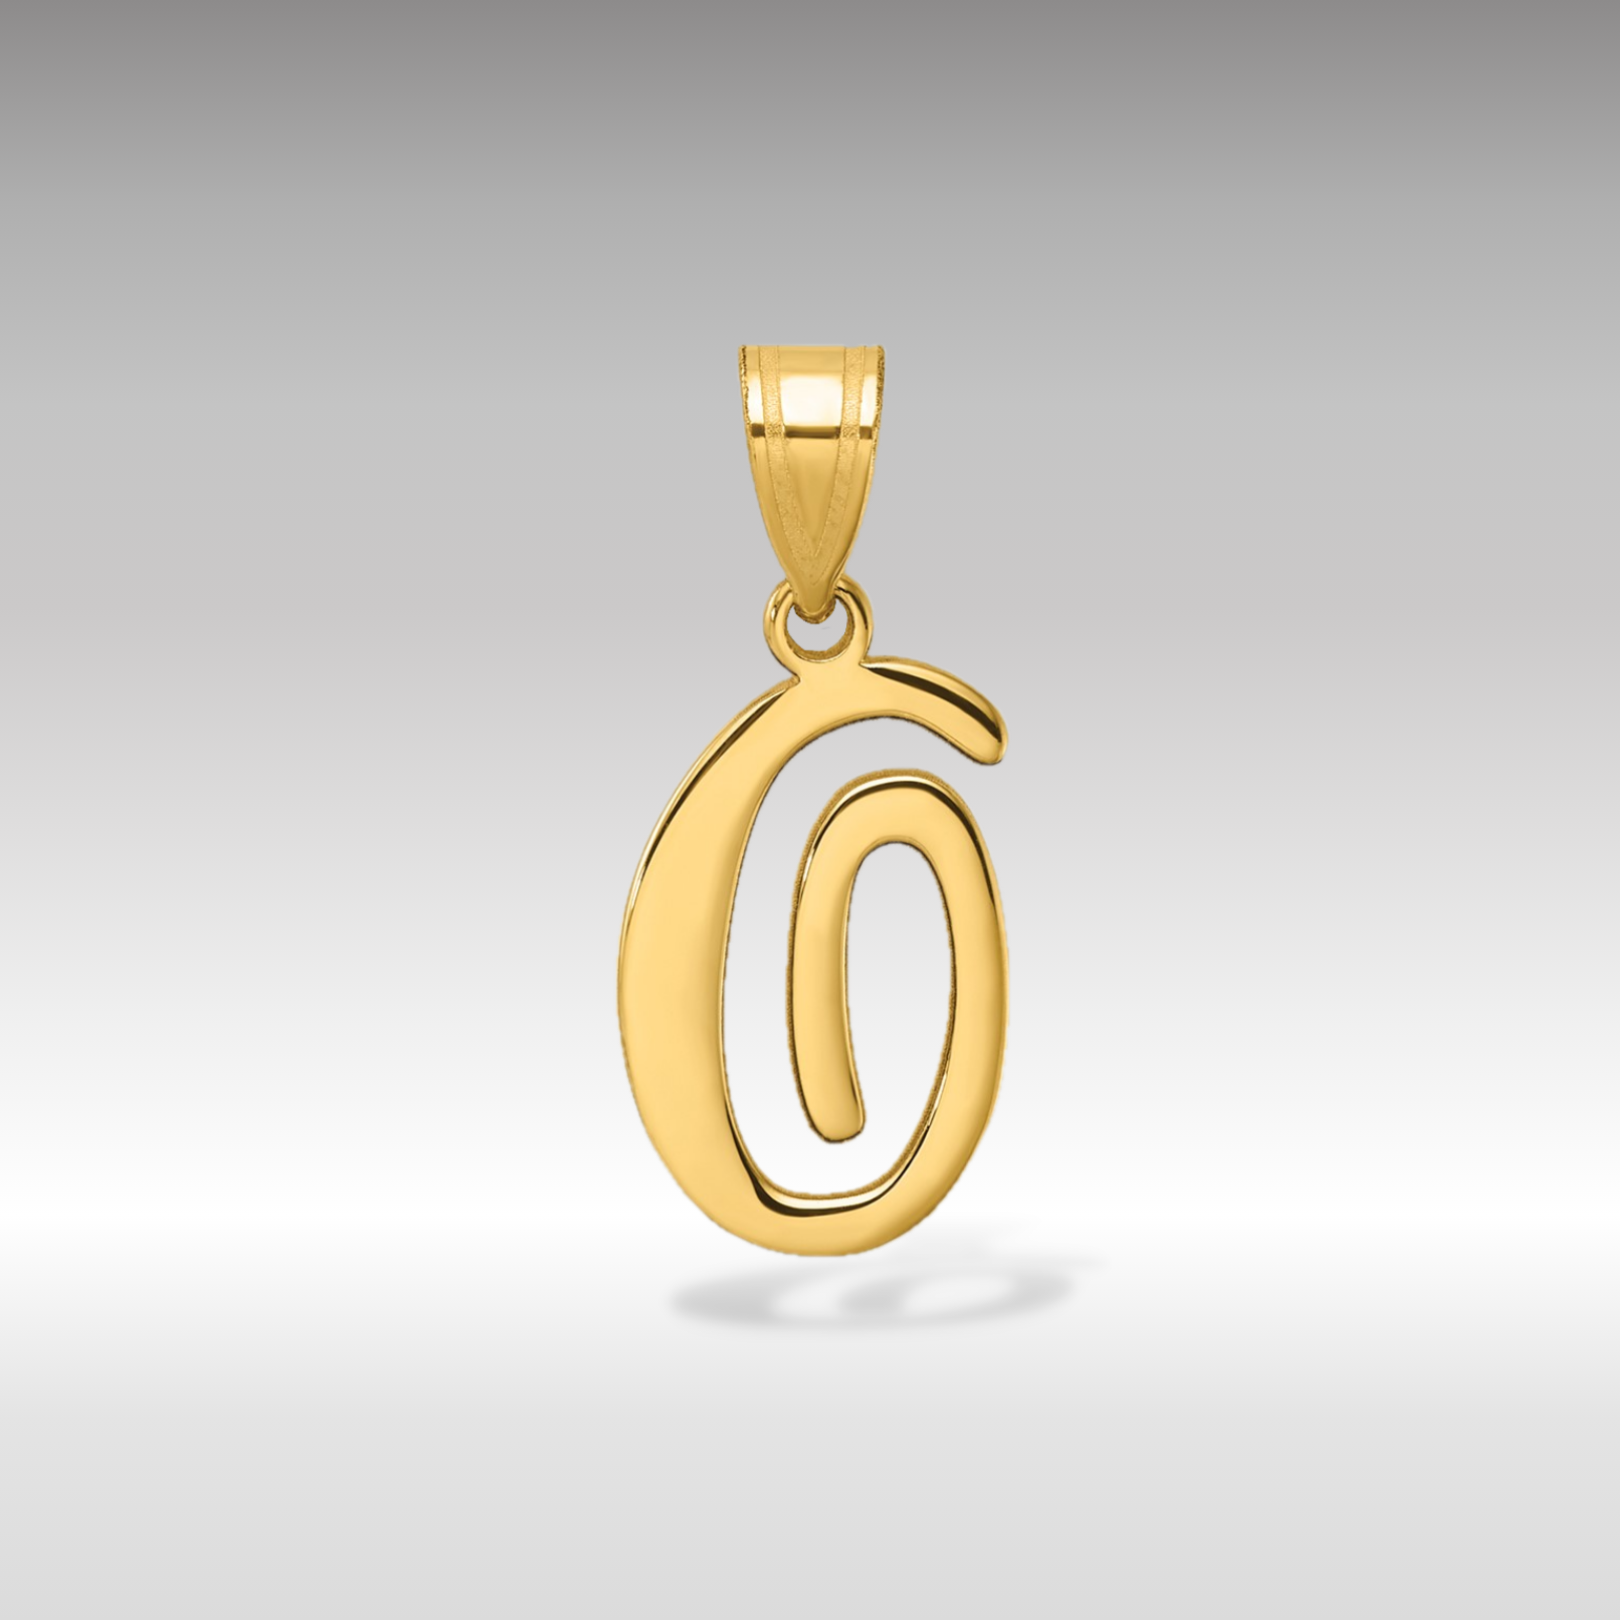 14K Gold Large Letter "O" Script Initial Pendant - Charlie & Co. Jewelry